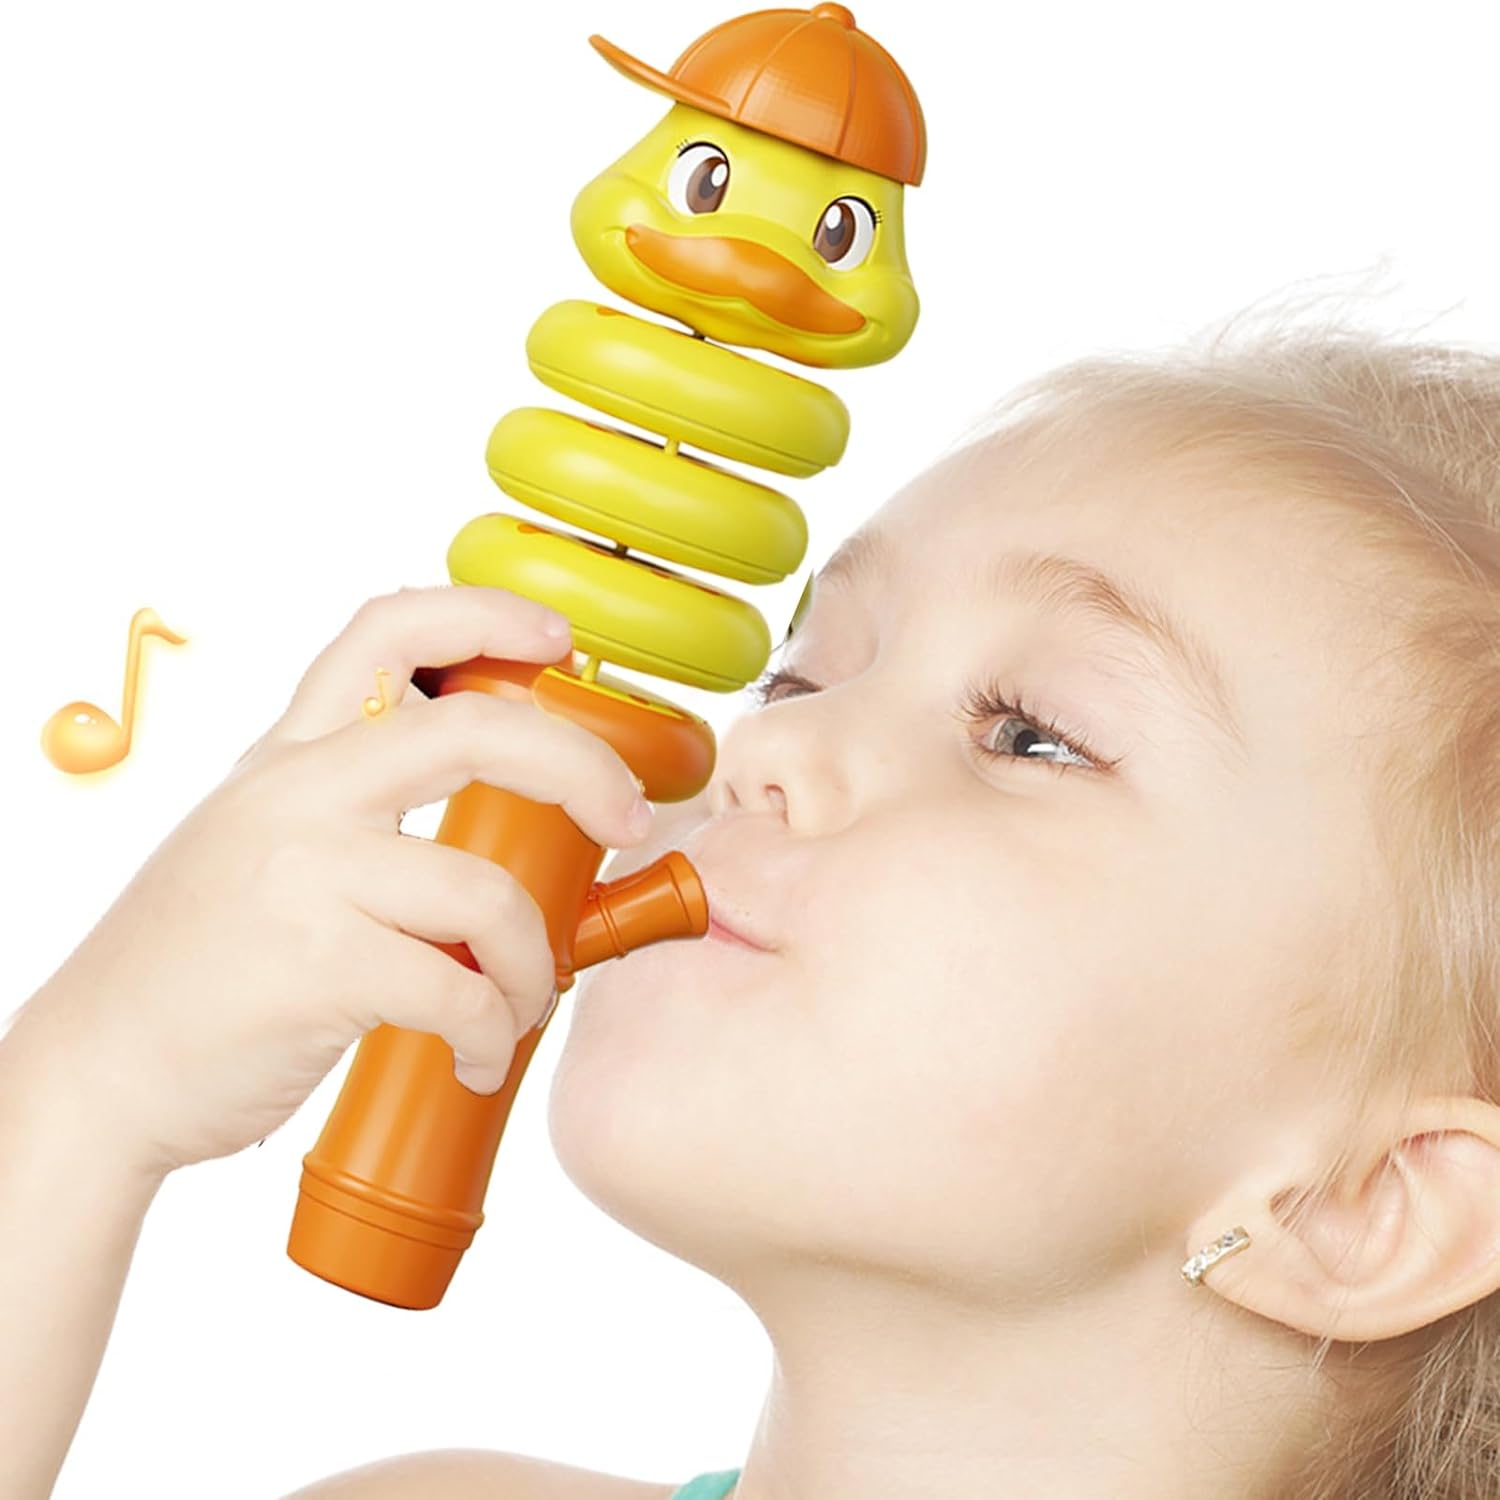 Kids Wiggly Snake Toy Kids Wiggly Snake Whistle Toy Stress Relief Funny Educational 360 Degree Body Swinging